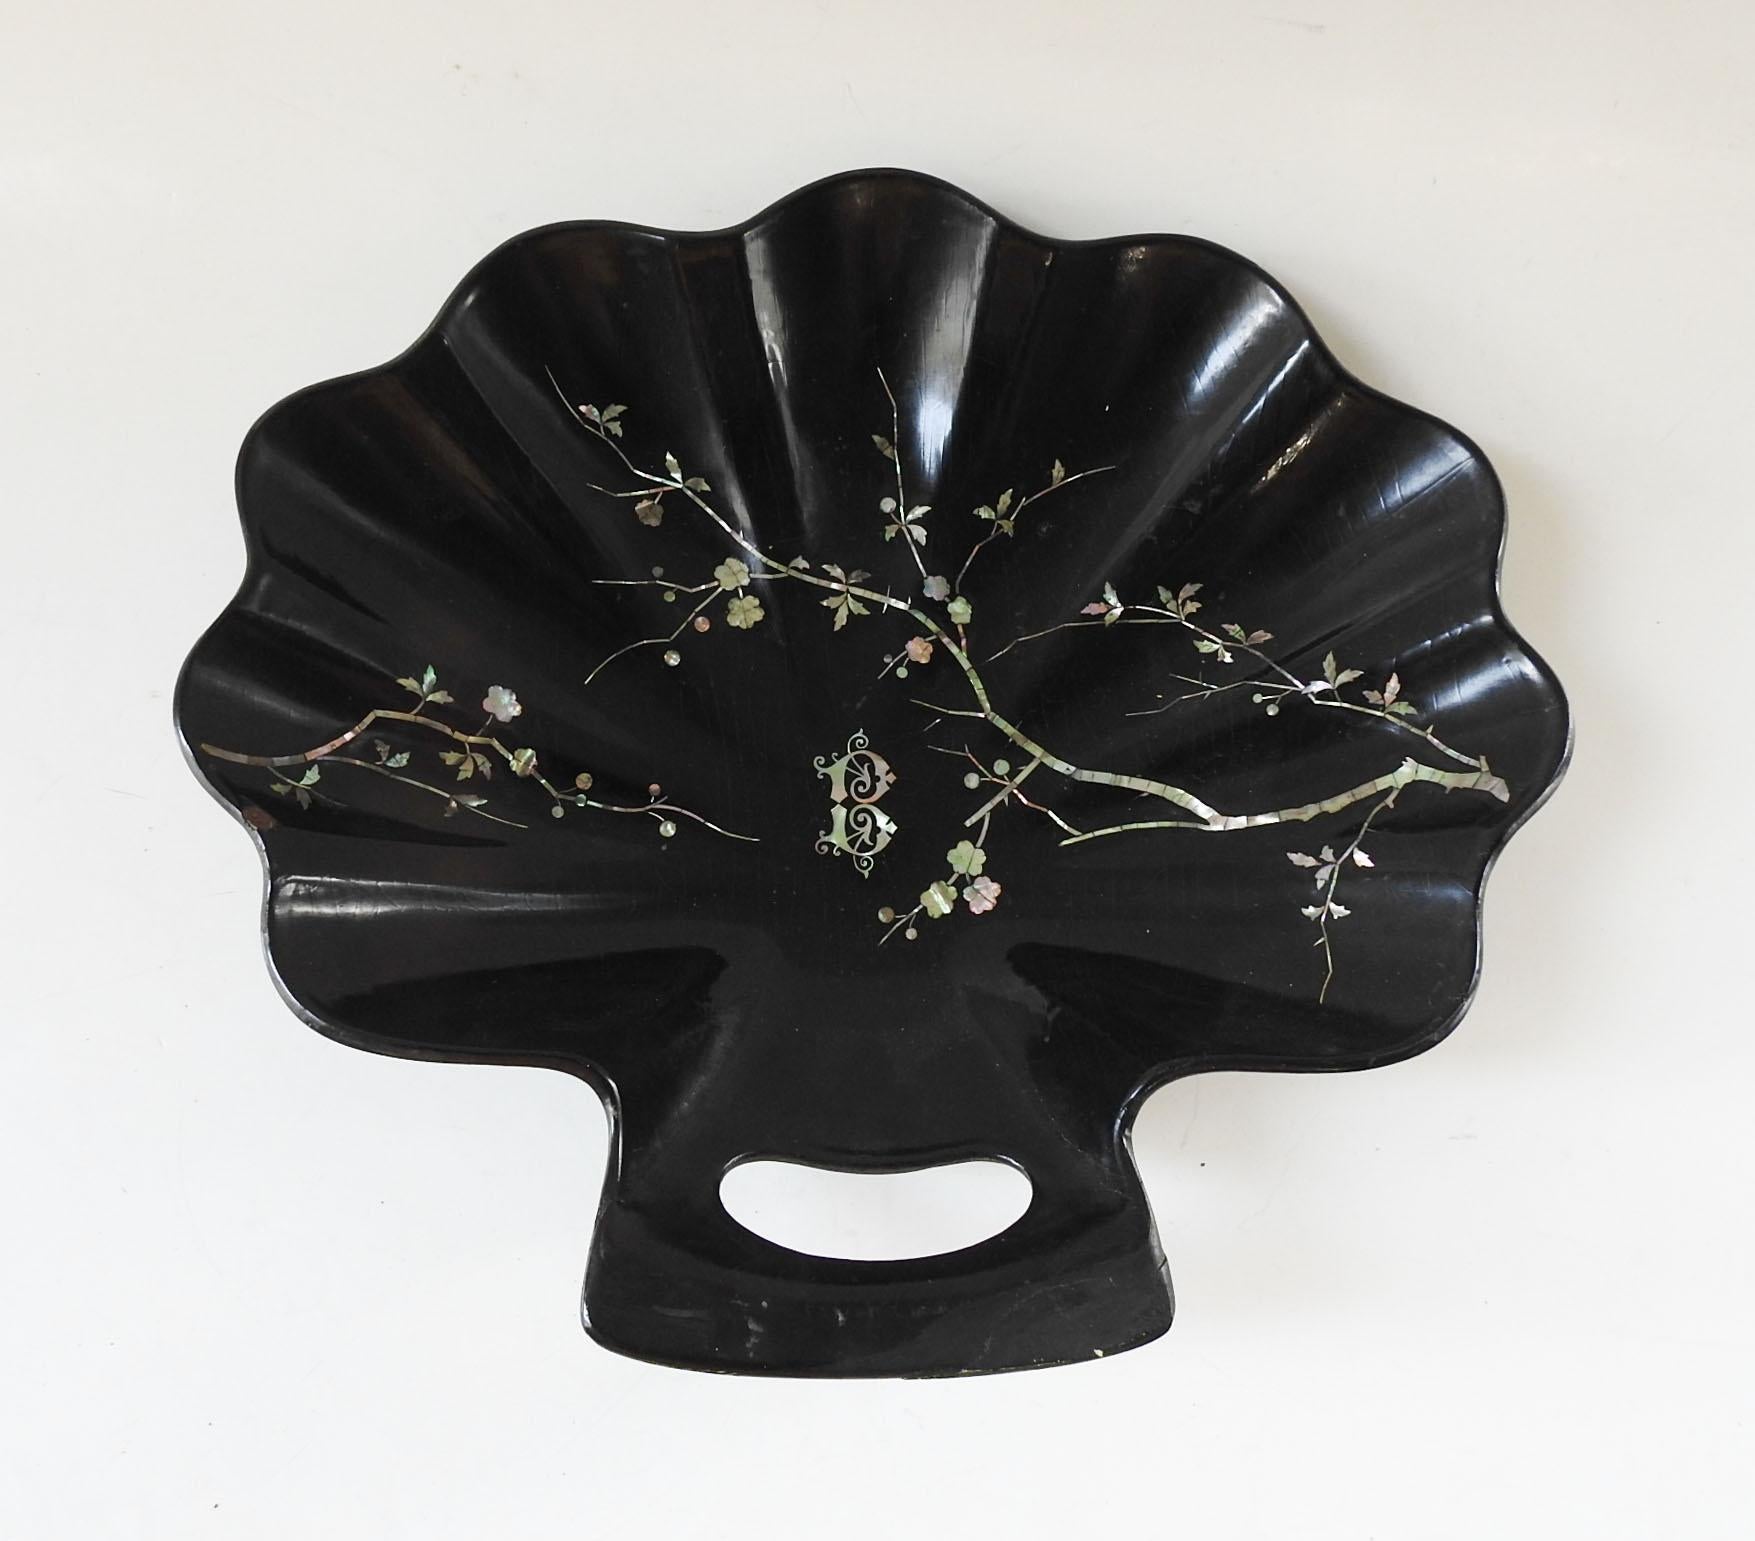 Circa 1890's black paper mache crumb tray.  Scalloped shell shape with mother of pearl inlay in cherry blossom pattern and the letter B.  No markings, repainted repaired handle corner and a small surface edge chip, overall craquelure.